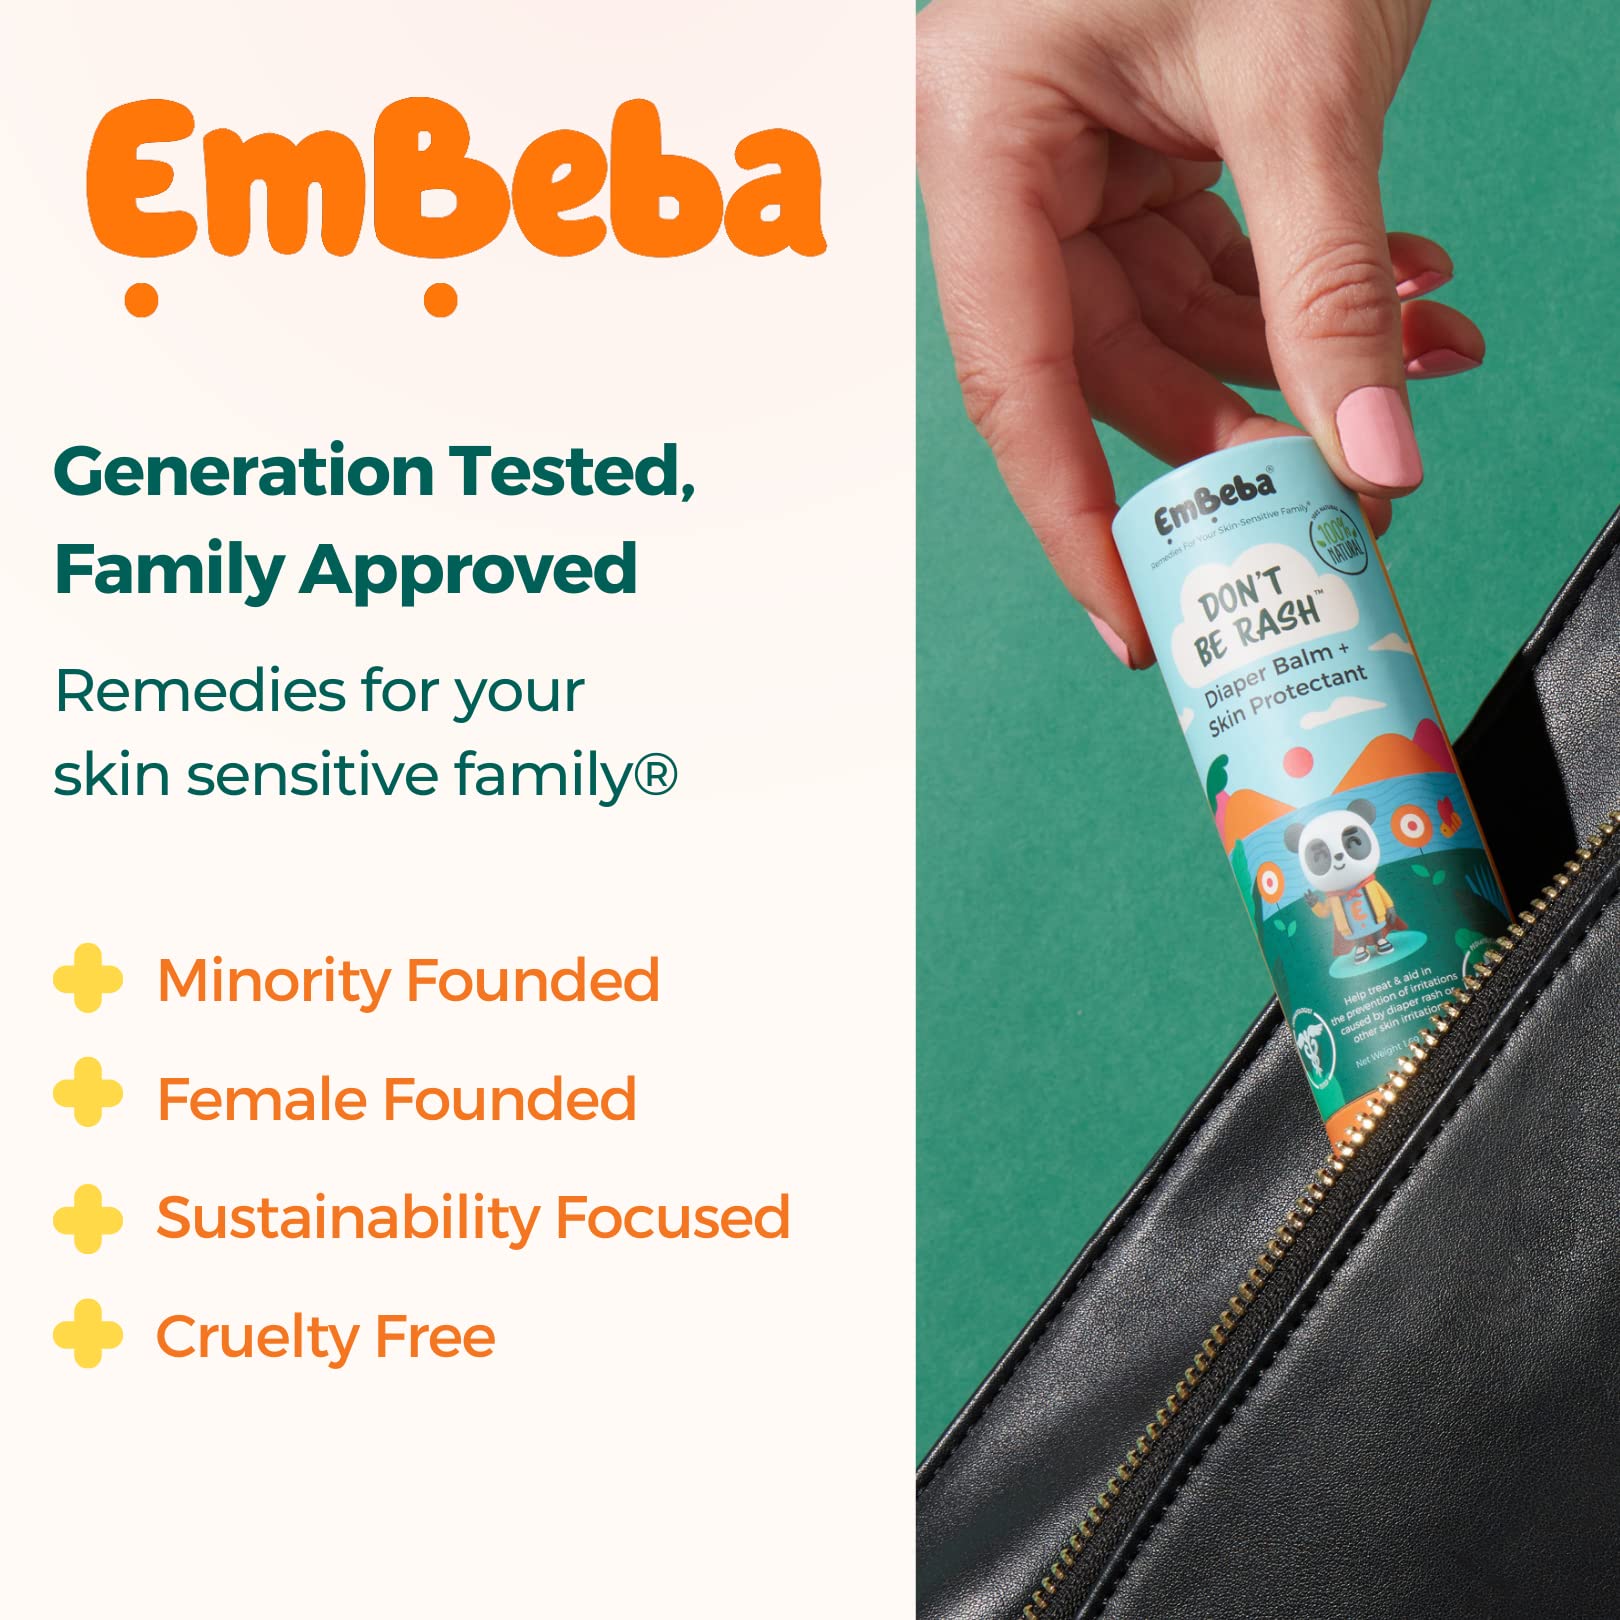 EmBeba Natural Diaper Rash Cream for Baby with Sensitive Skin | Travel Friendly Baby Rash Ointment with Built-in Diaper Balm Stick Roll-On Applicator, All Over Herbal Skin Care, 1 Pack